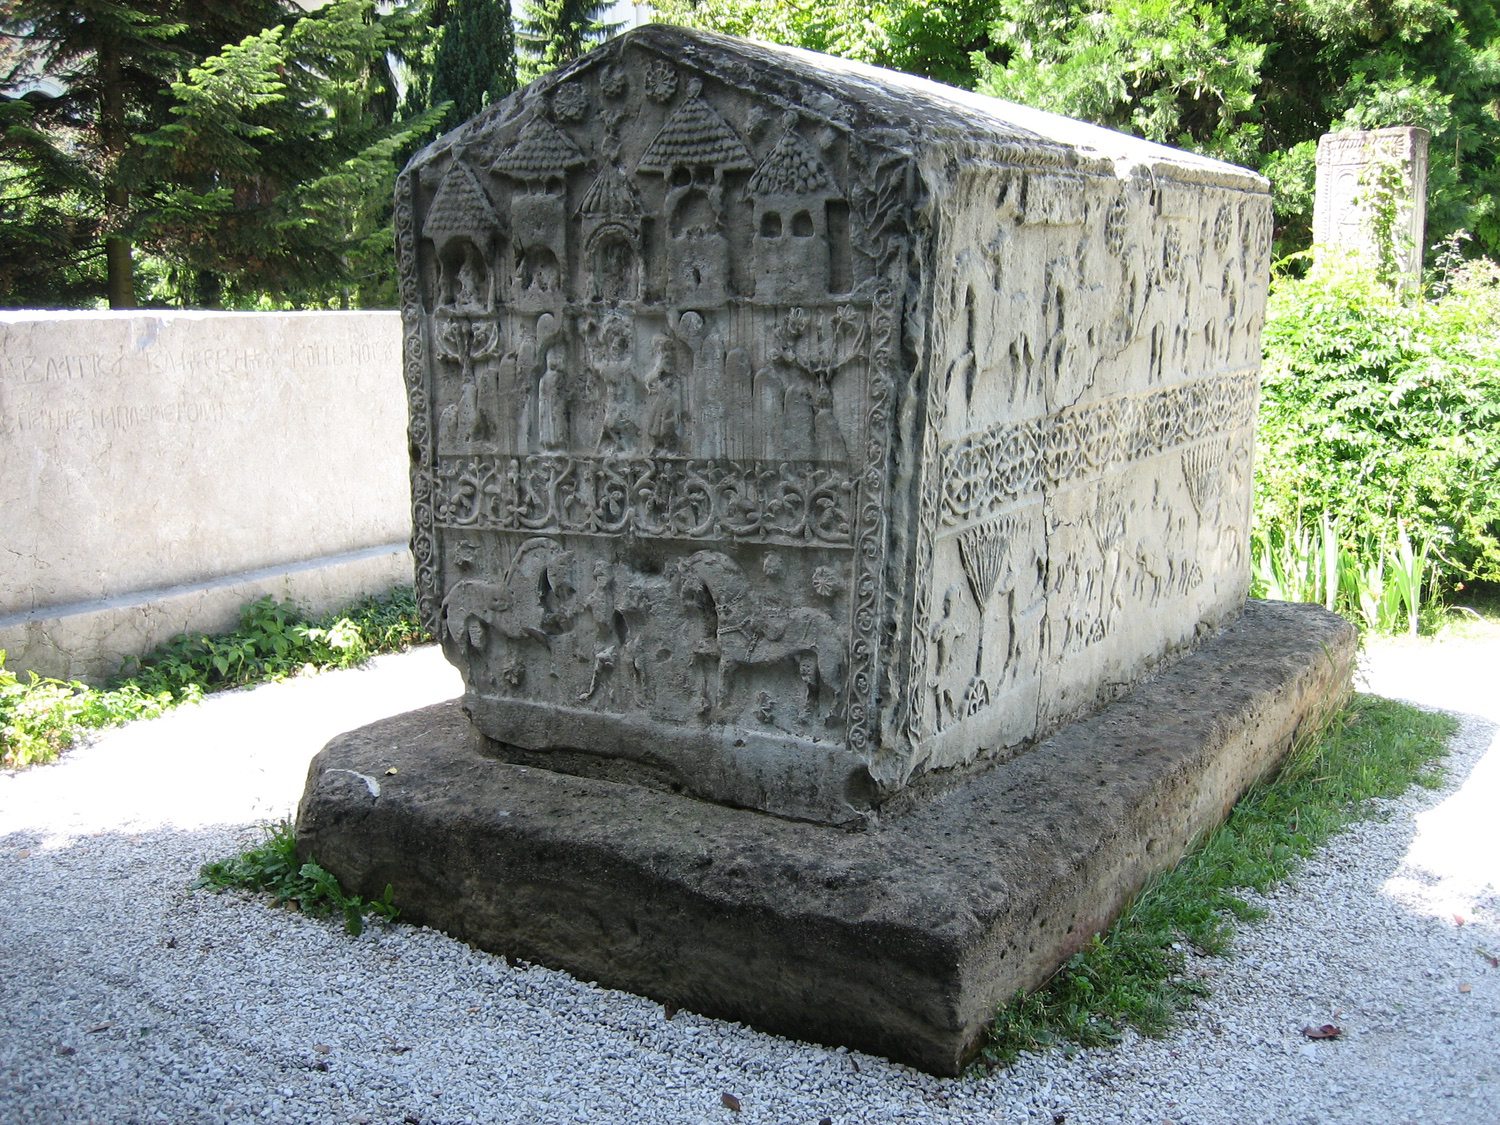 <p>This stećak is an important tombstone of the region. Scholars contend that it was made during the 14th century and served as the tombstone of the medieval Bosnian King Stjepan II who died in 1353. The illustrations of buildings on the end are believed to be some of the earliest representations of Bosnian domestic structures. The stećak was found in Donja Zgošća near Kakanj, approximately 50 kilometers north of Sarajevo along the Bosna River. The tombstone now sits in the garden of the Bosnia and Herzegovina National Museum in Sarajevo.&nbsp;</p>